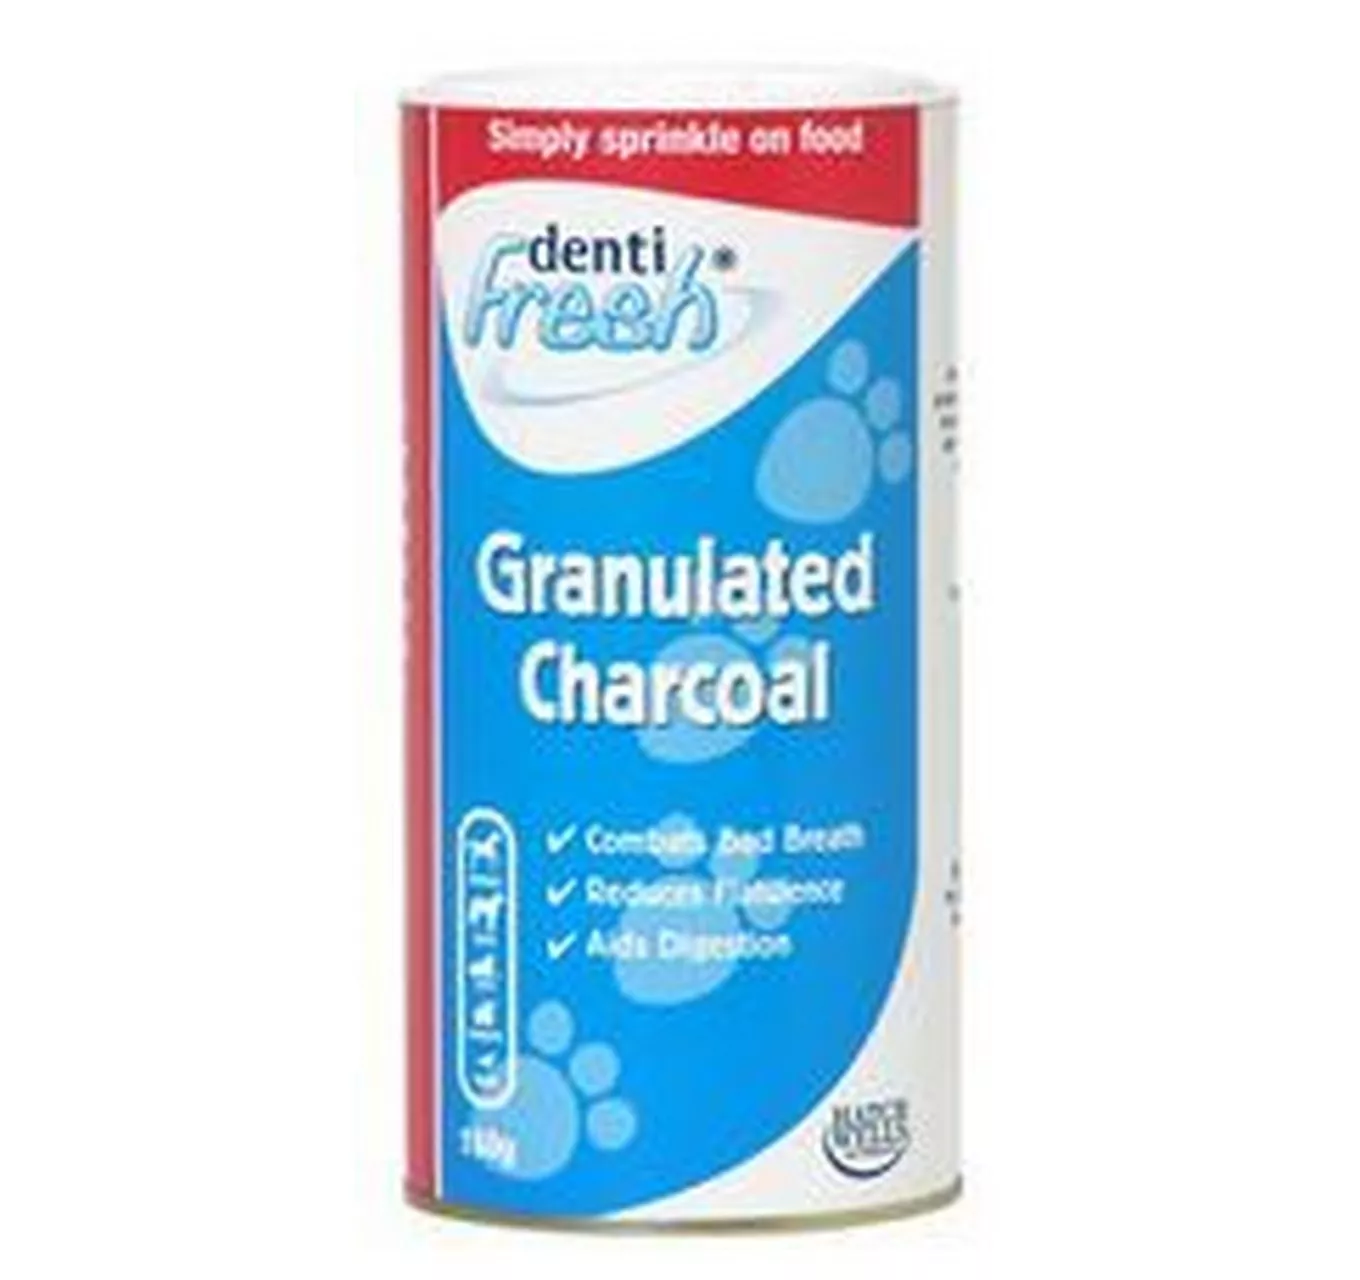 Granulated Charcoal 150g